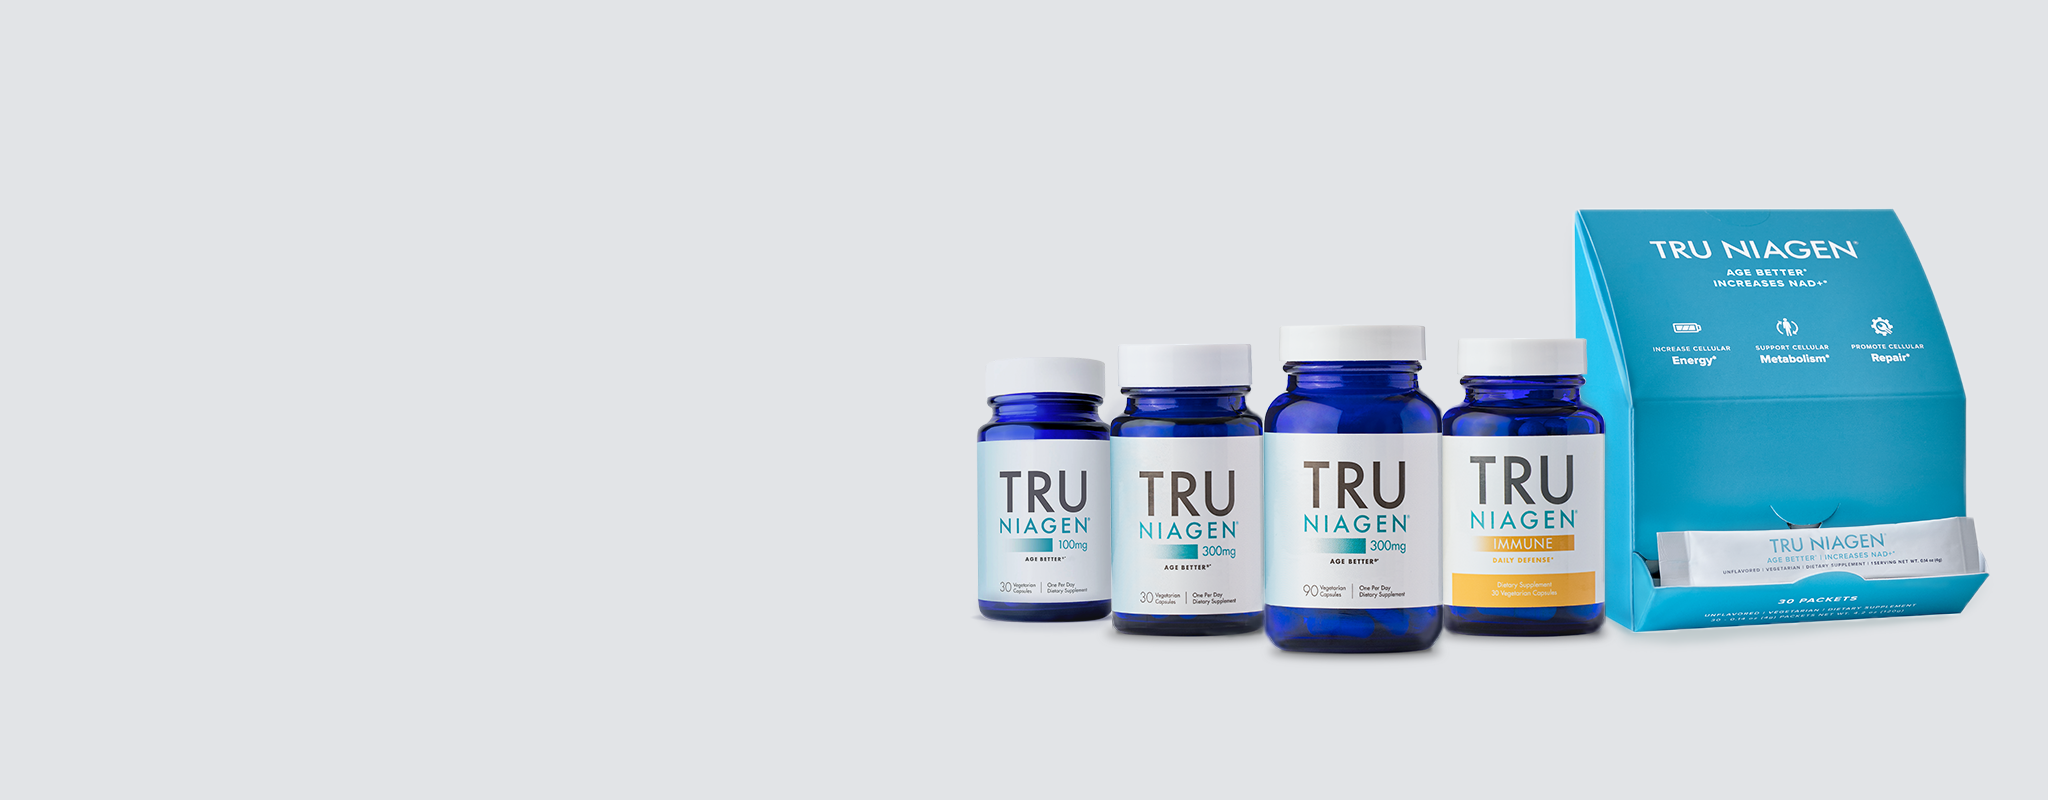 Tru Niagen 300 mg in two bottle sizes and in stick pack form